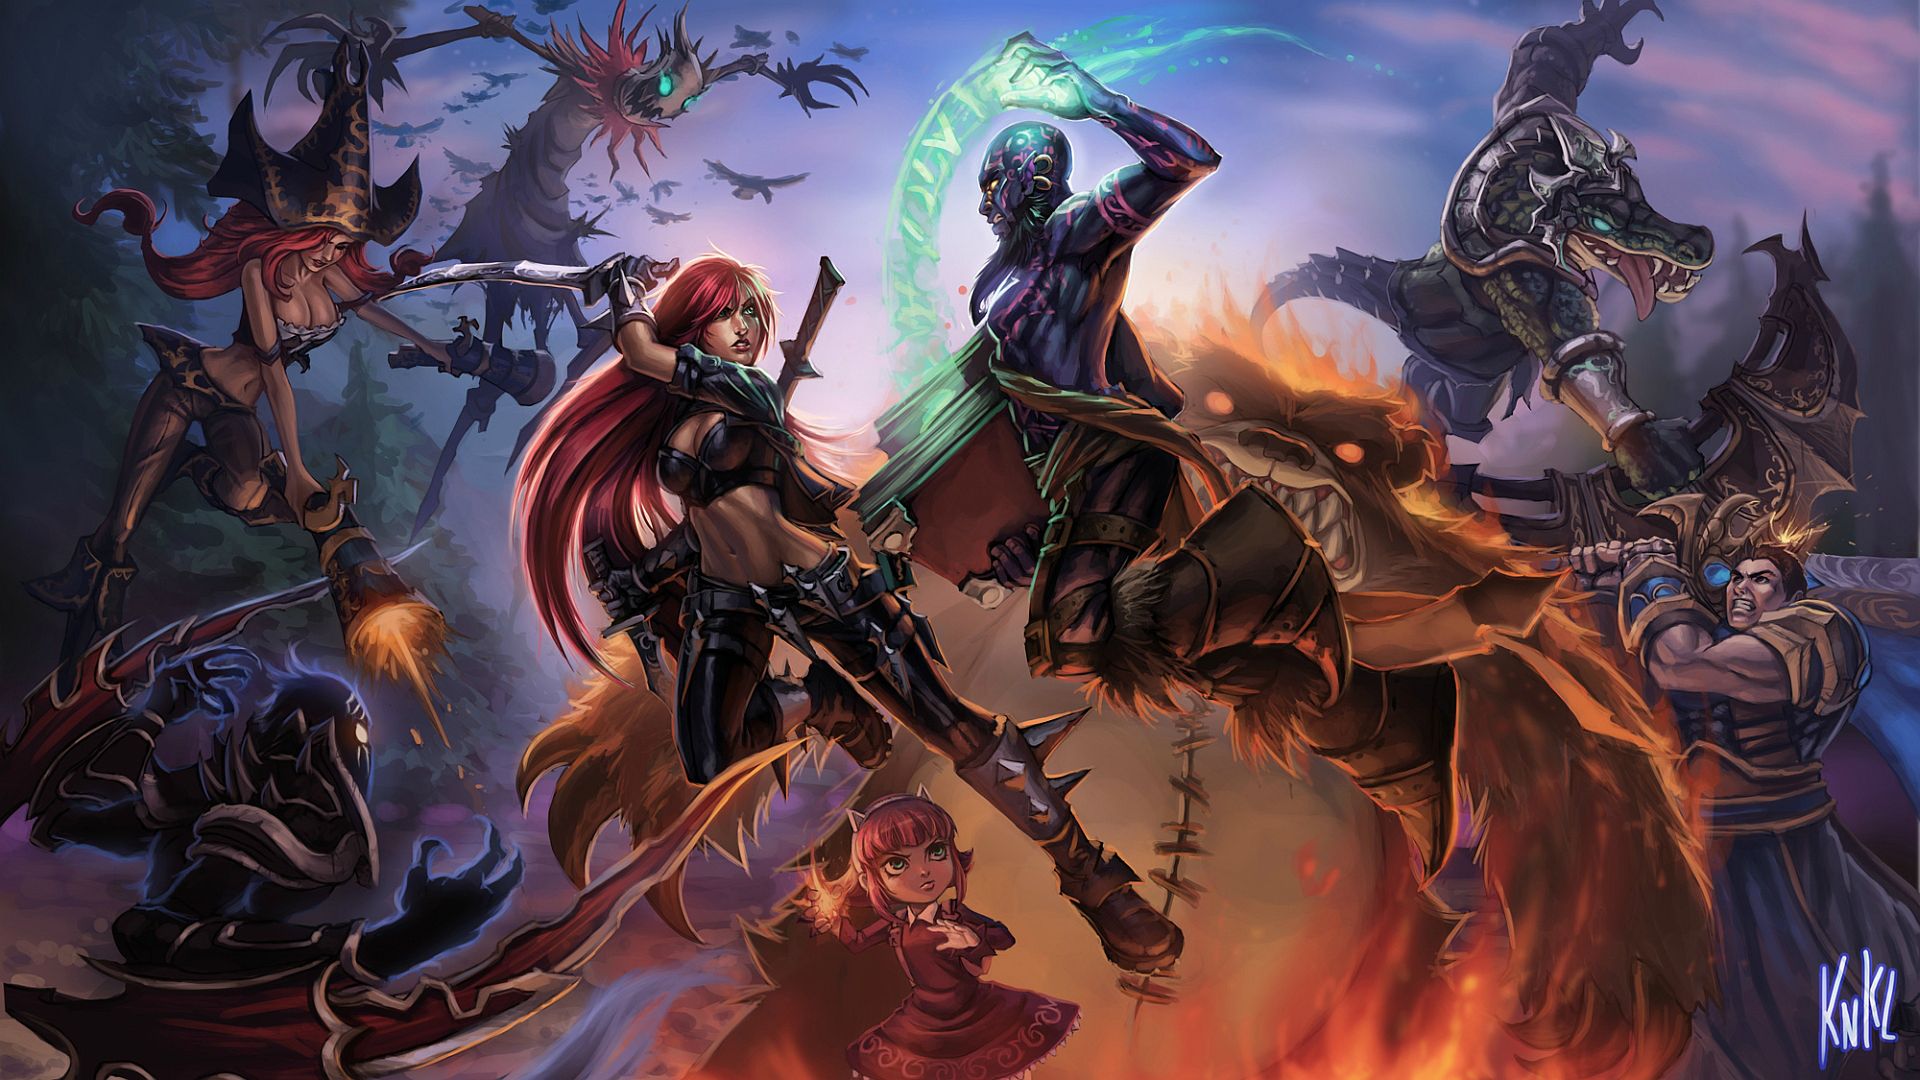  League of Legends Champion wallpapers all high resolution just for